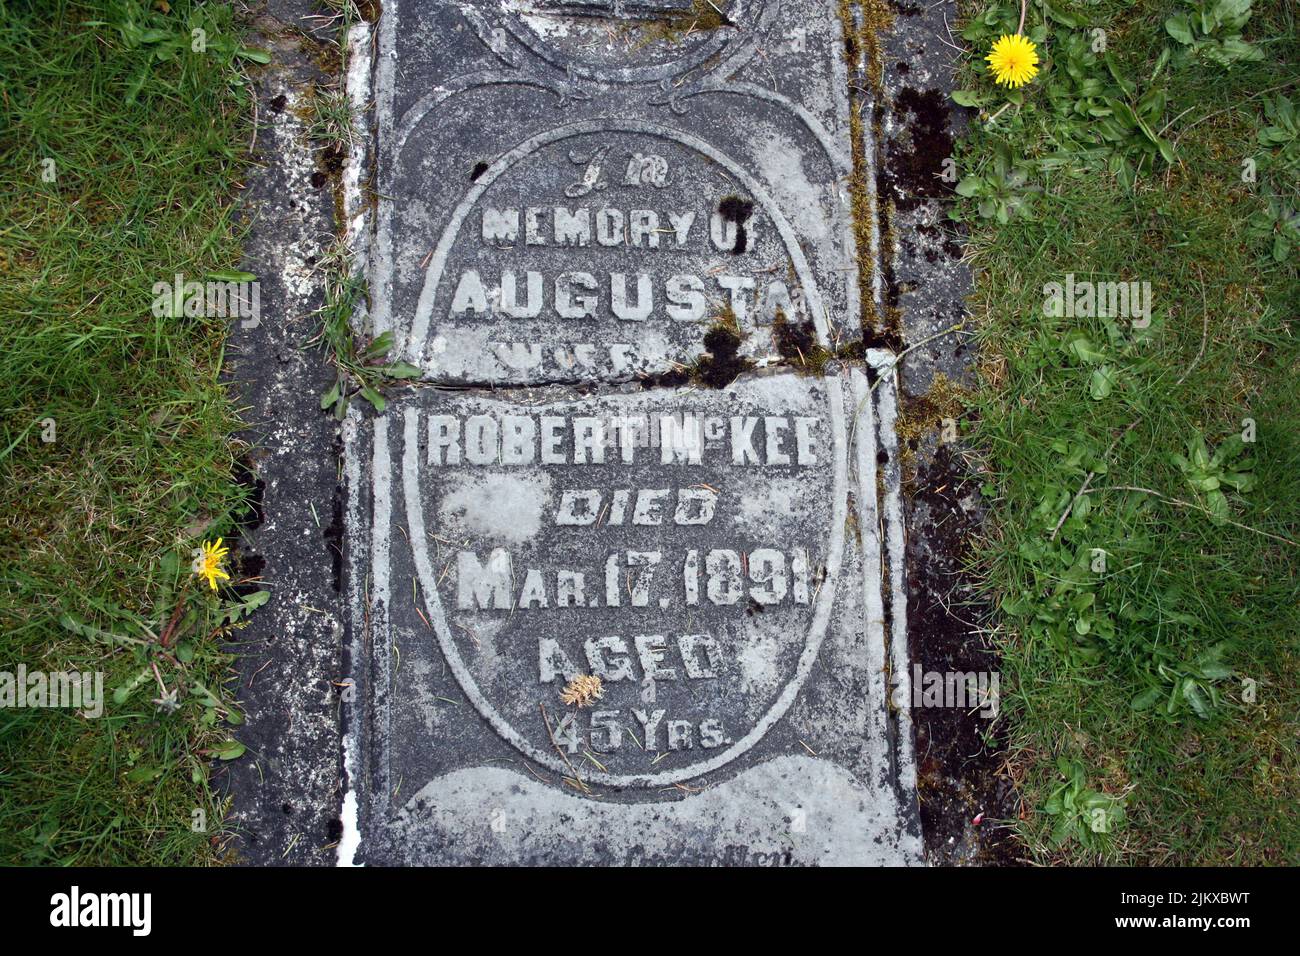 An Old tombstone in cemetery for memory of Robert McKee in Langley, British Columbia, Canada Stock Photo